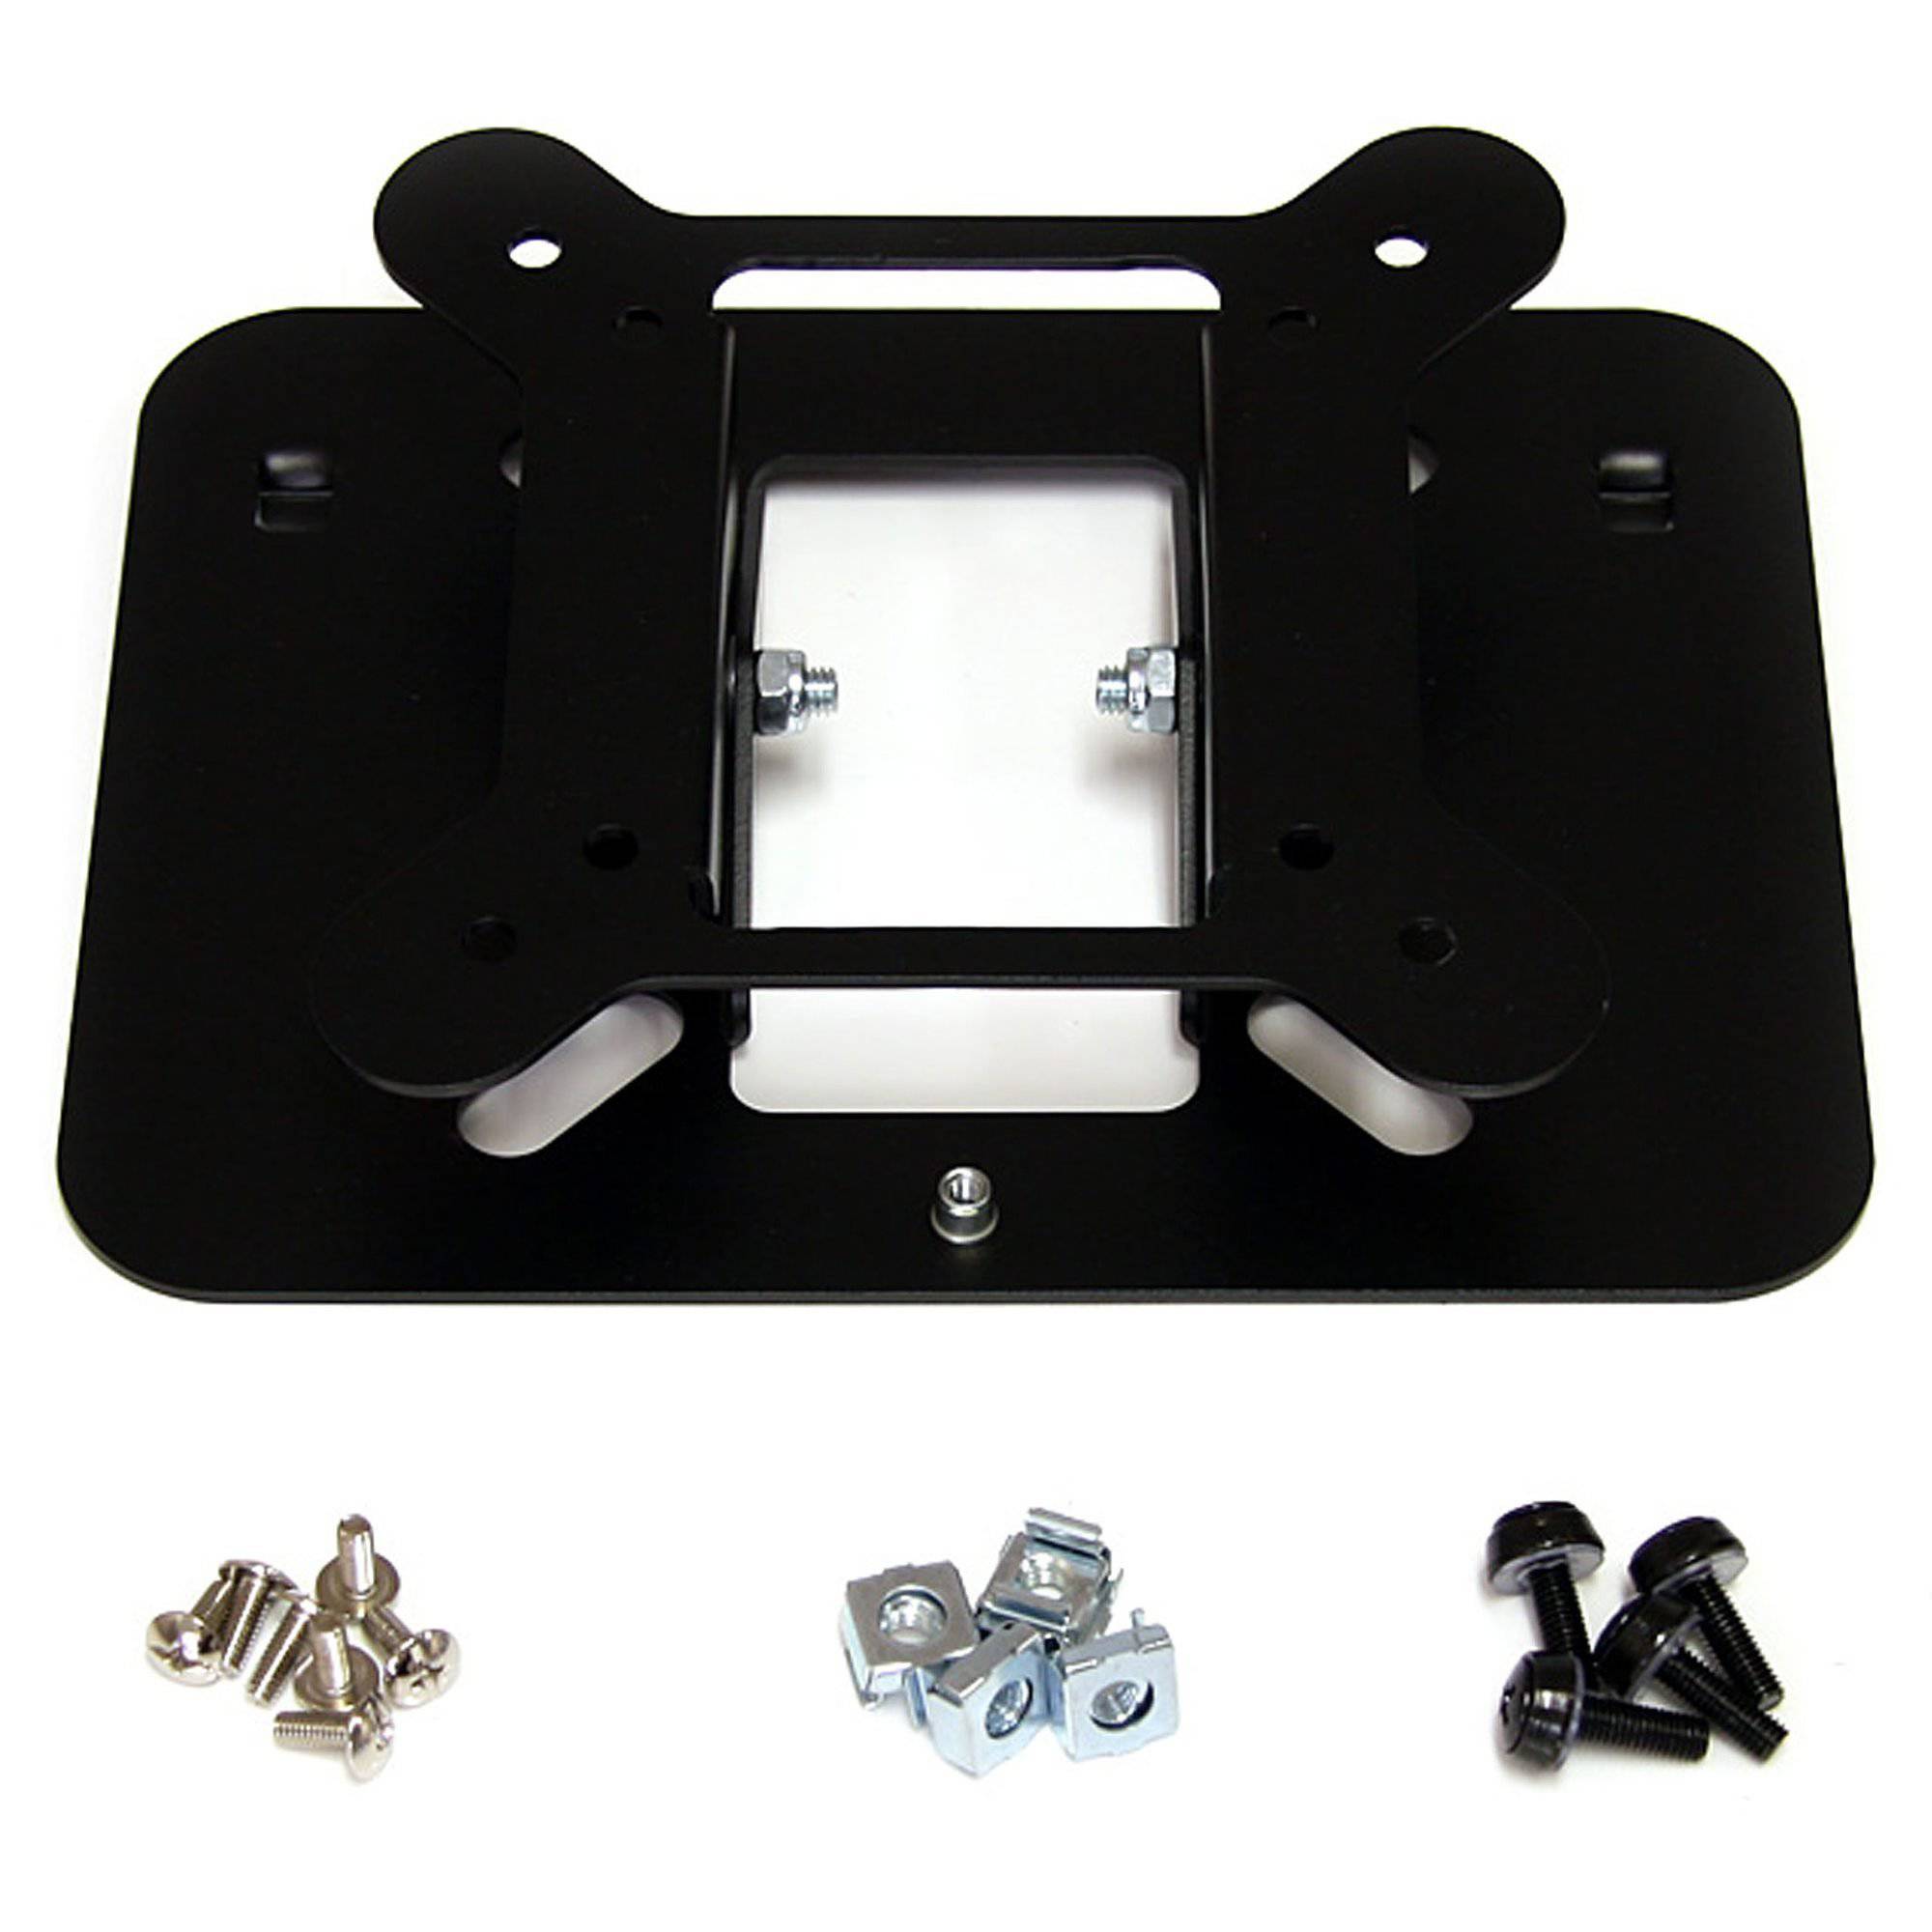 LCD Monitor Mounting 17/19 Bracket (19 Inch Rack-Mount Application)